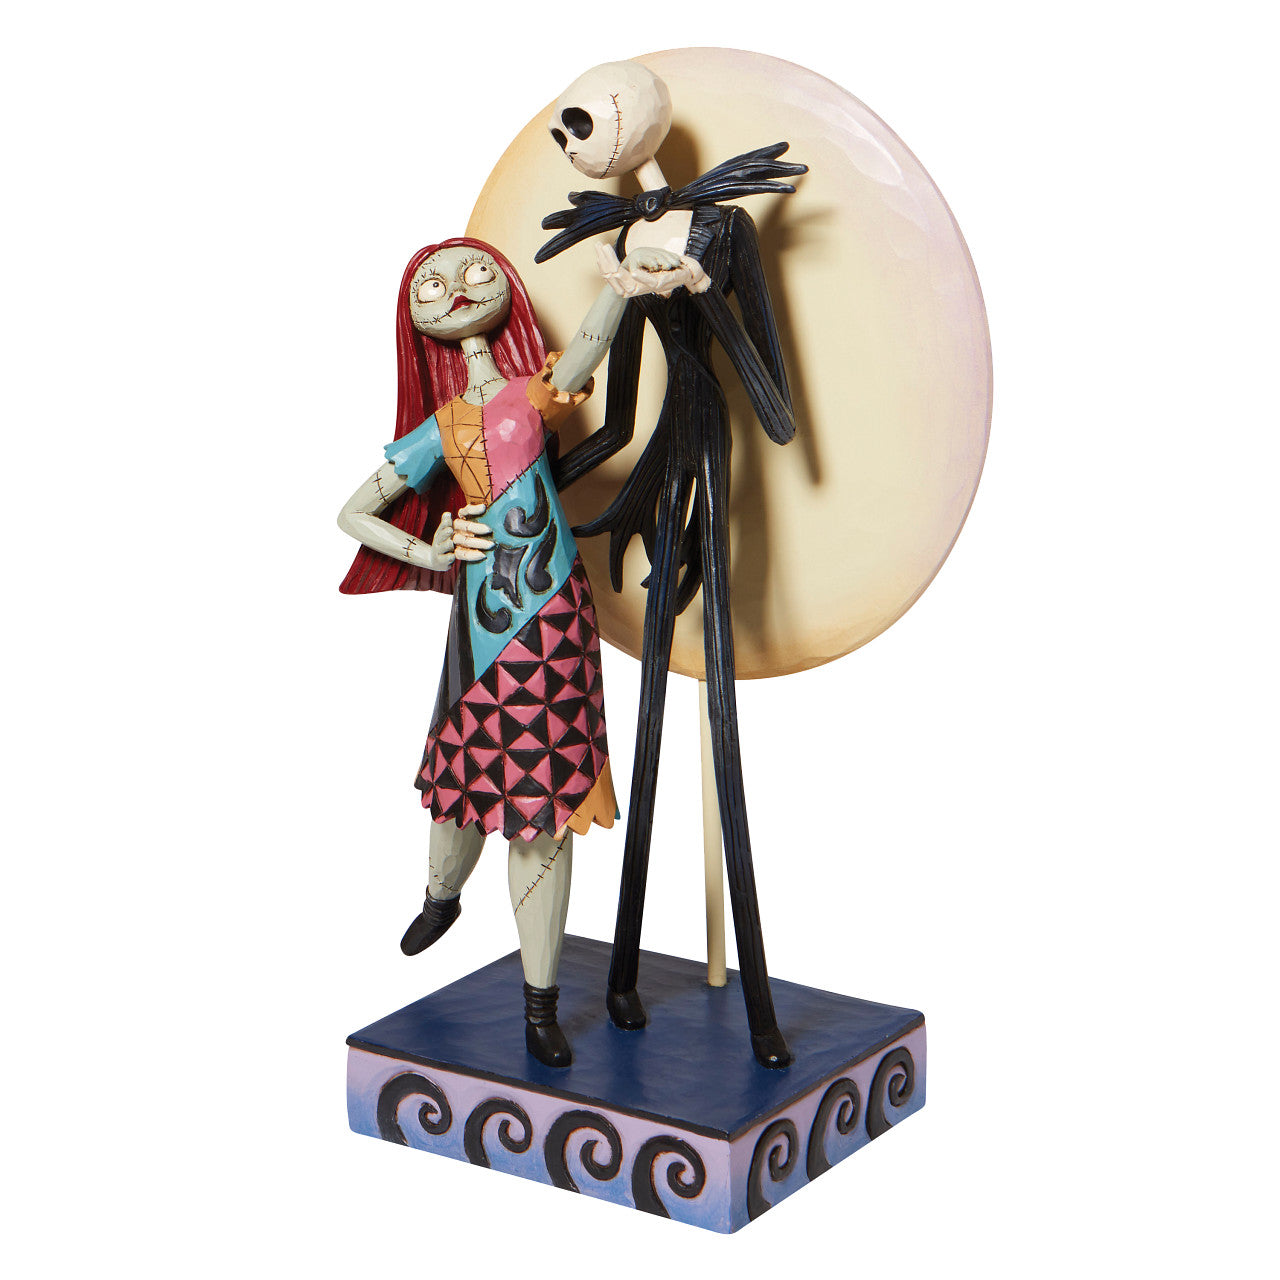 A Moonlit Dance - Jack and Sally Romance